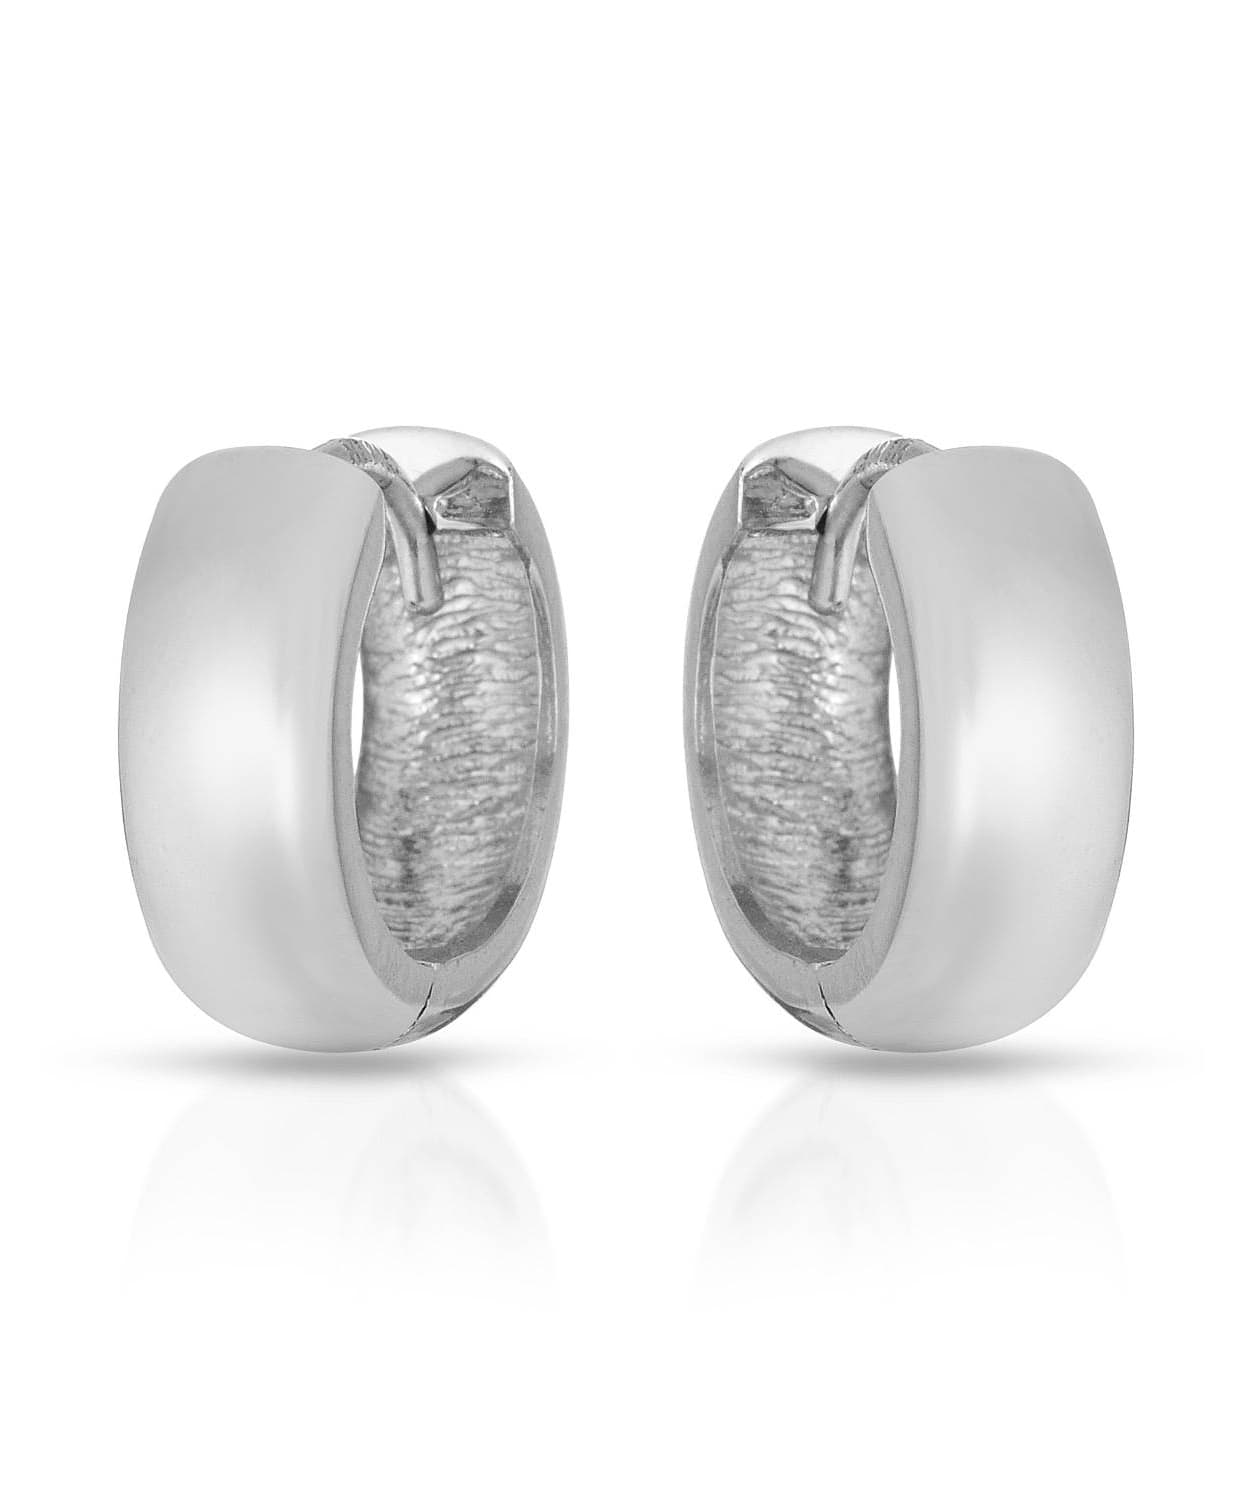 14k White Gold Huggie Earrings with Satin Finish View 1